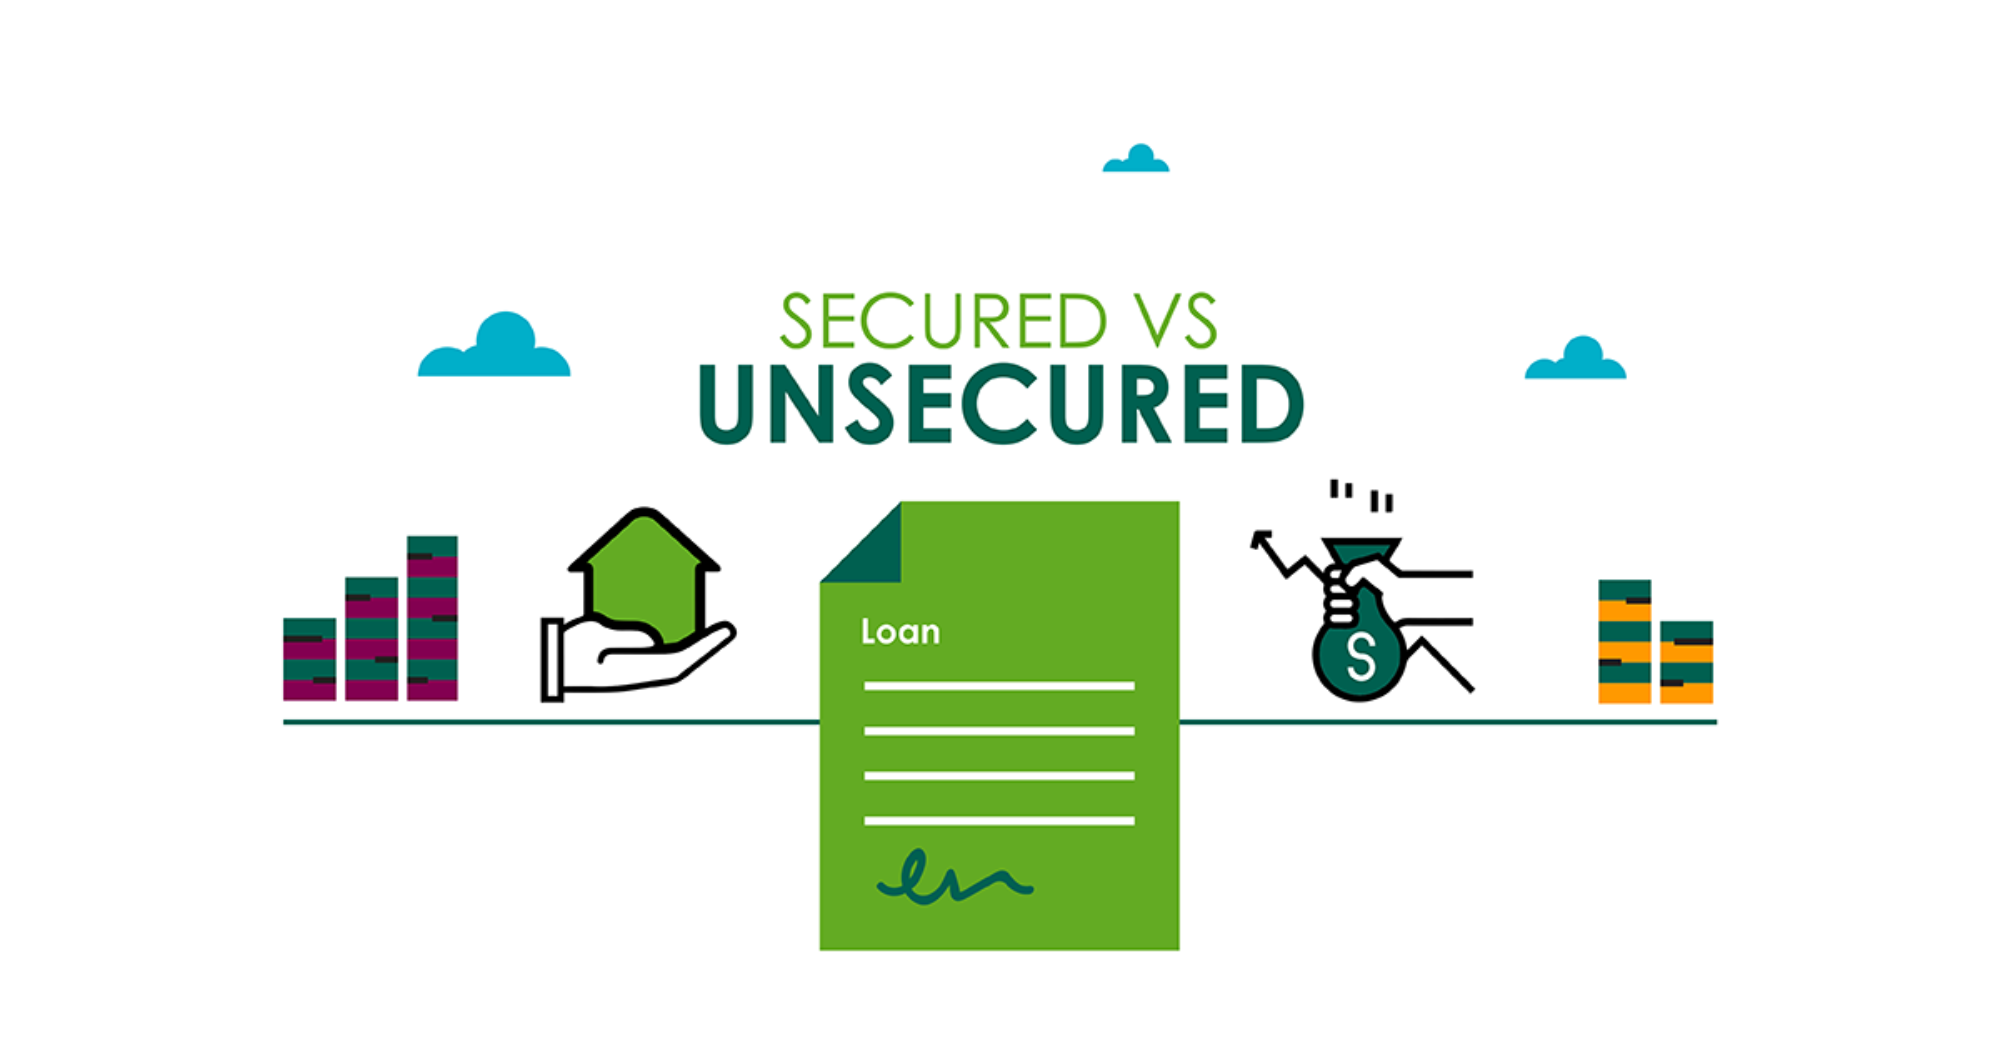 What Is The Difference Between Secured And Unsecured Loans